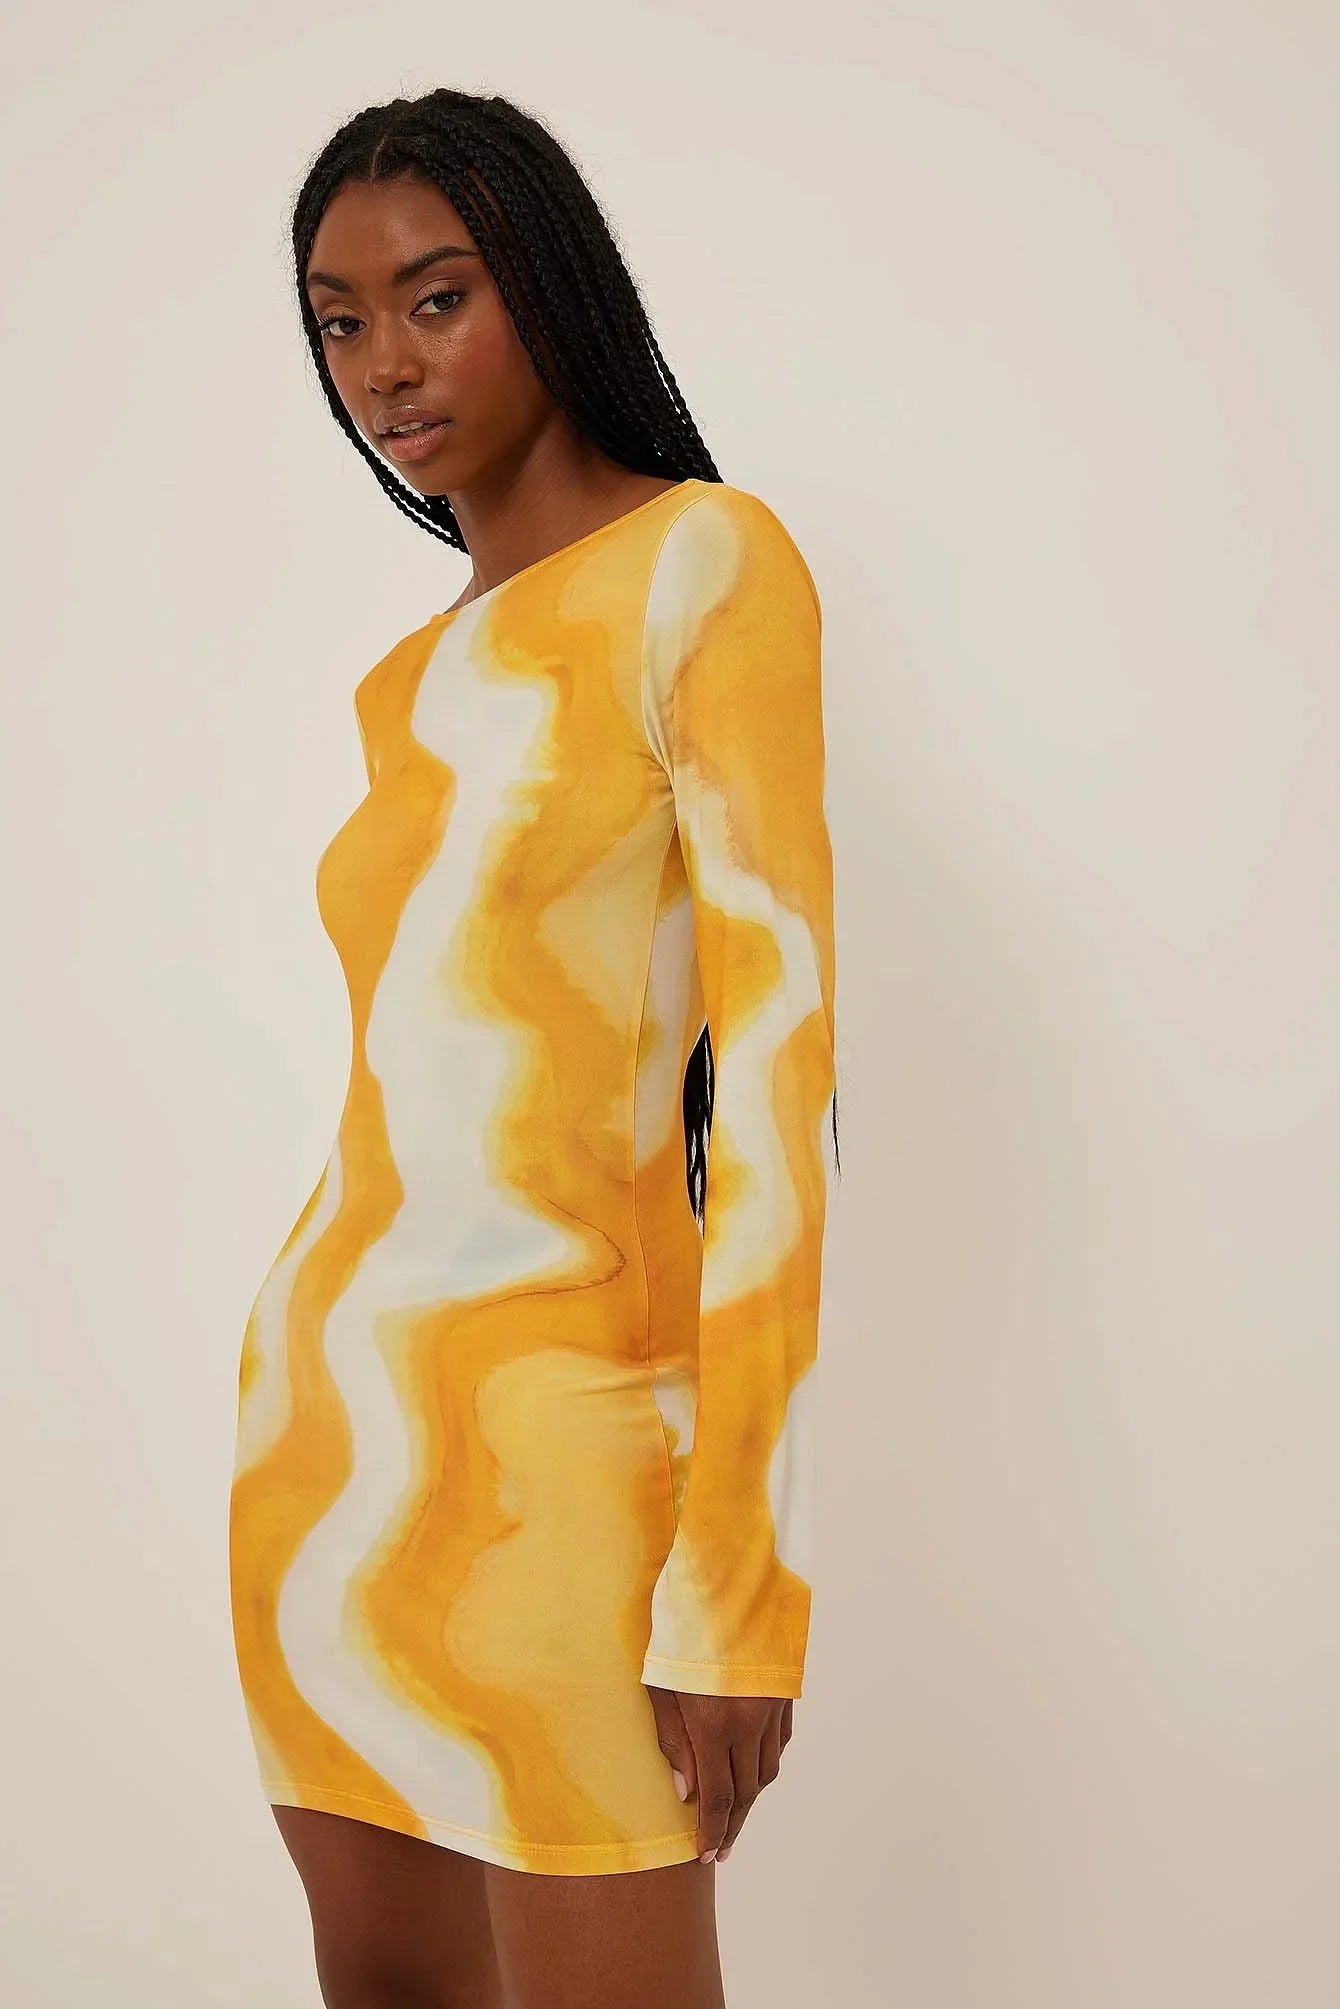 DEEP BACK PRINTED DRESS - EXCLUSIVE Dresses from NA-KD - Just €48! SHOP NOW AT IAMINHATELOVE BOTH IN STORE FOR CYPRUS AND ONLINE WORLDWIDE @ IAMINHATELOVE.COM